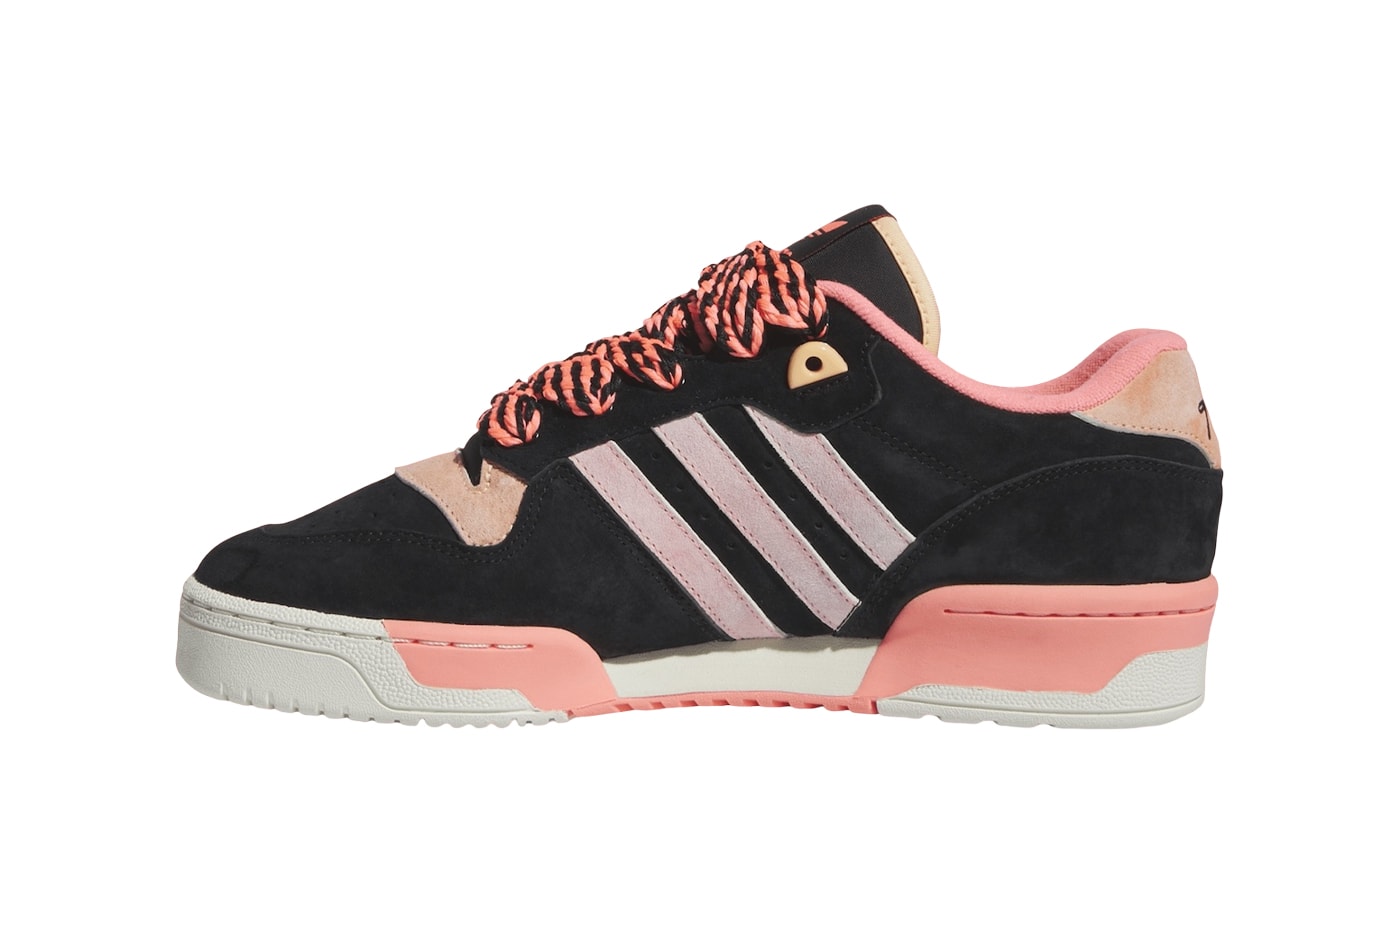 Anthony Edwards Latest adidas Rivalry Low Shoe Has Surfaced IH7729 now available released skate shoe pink black three stripes